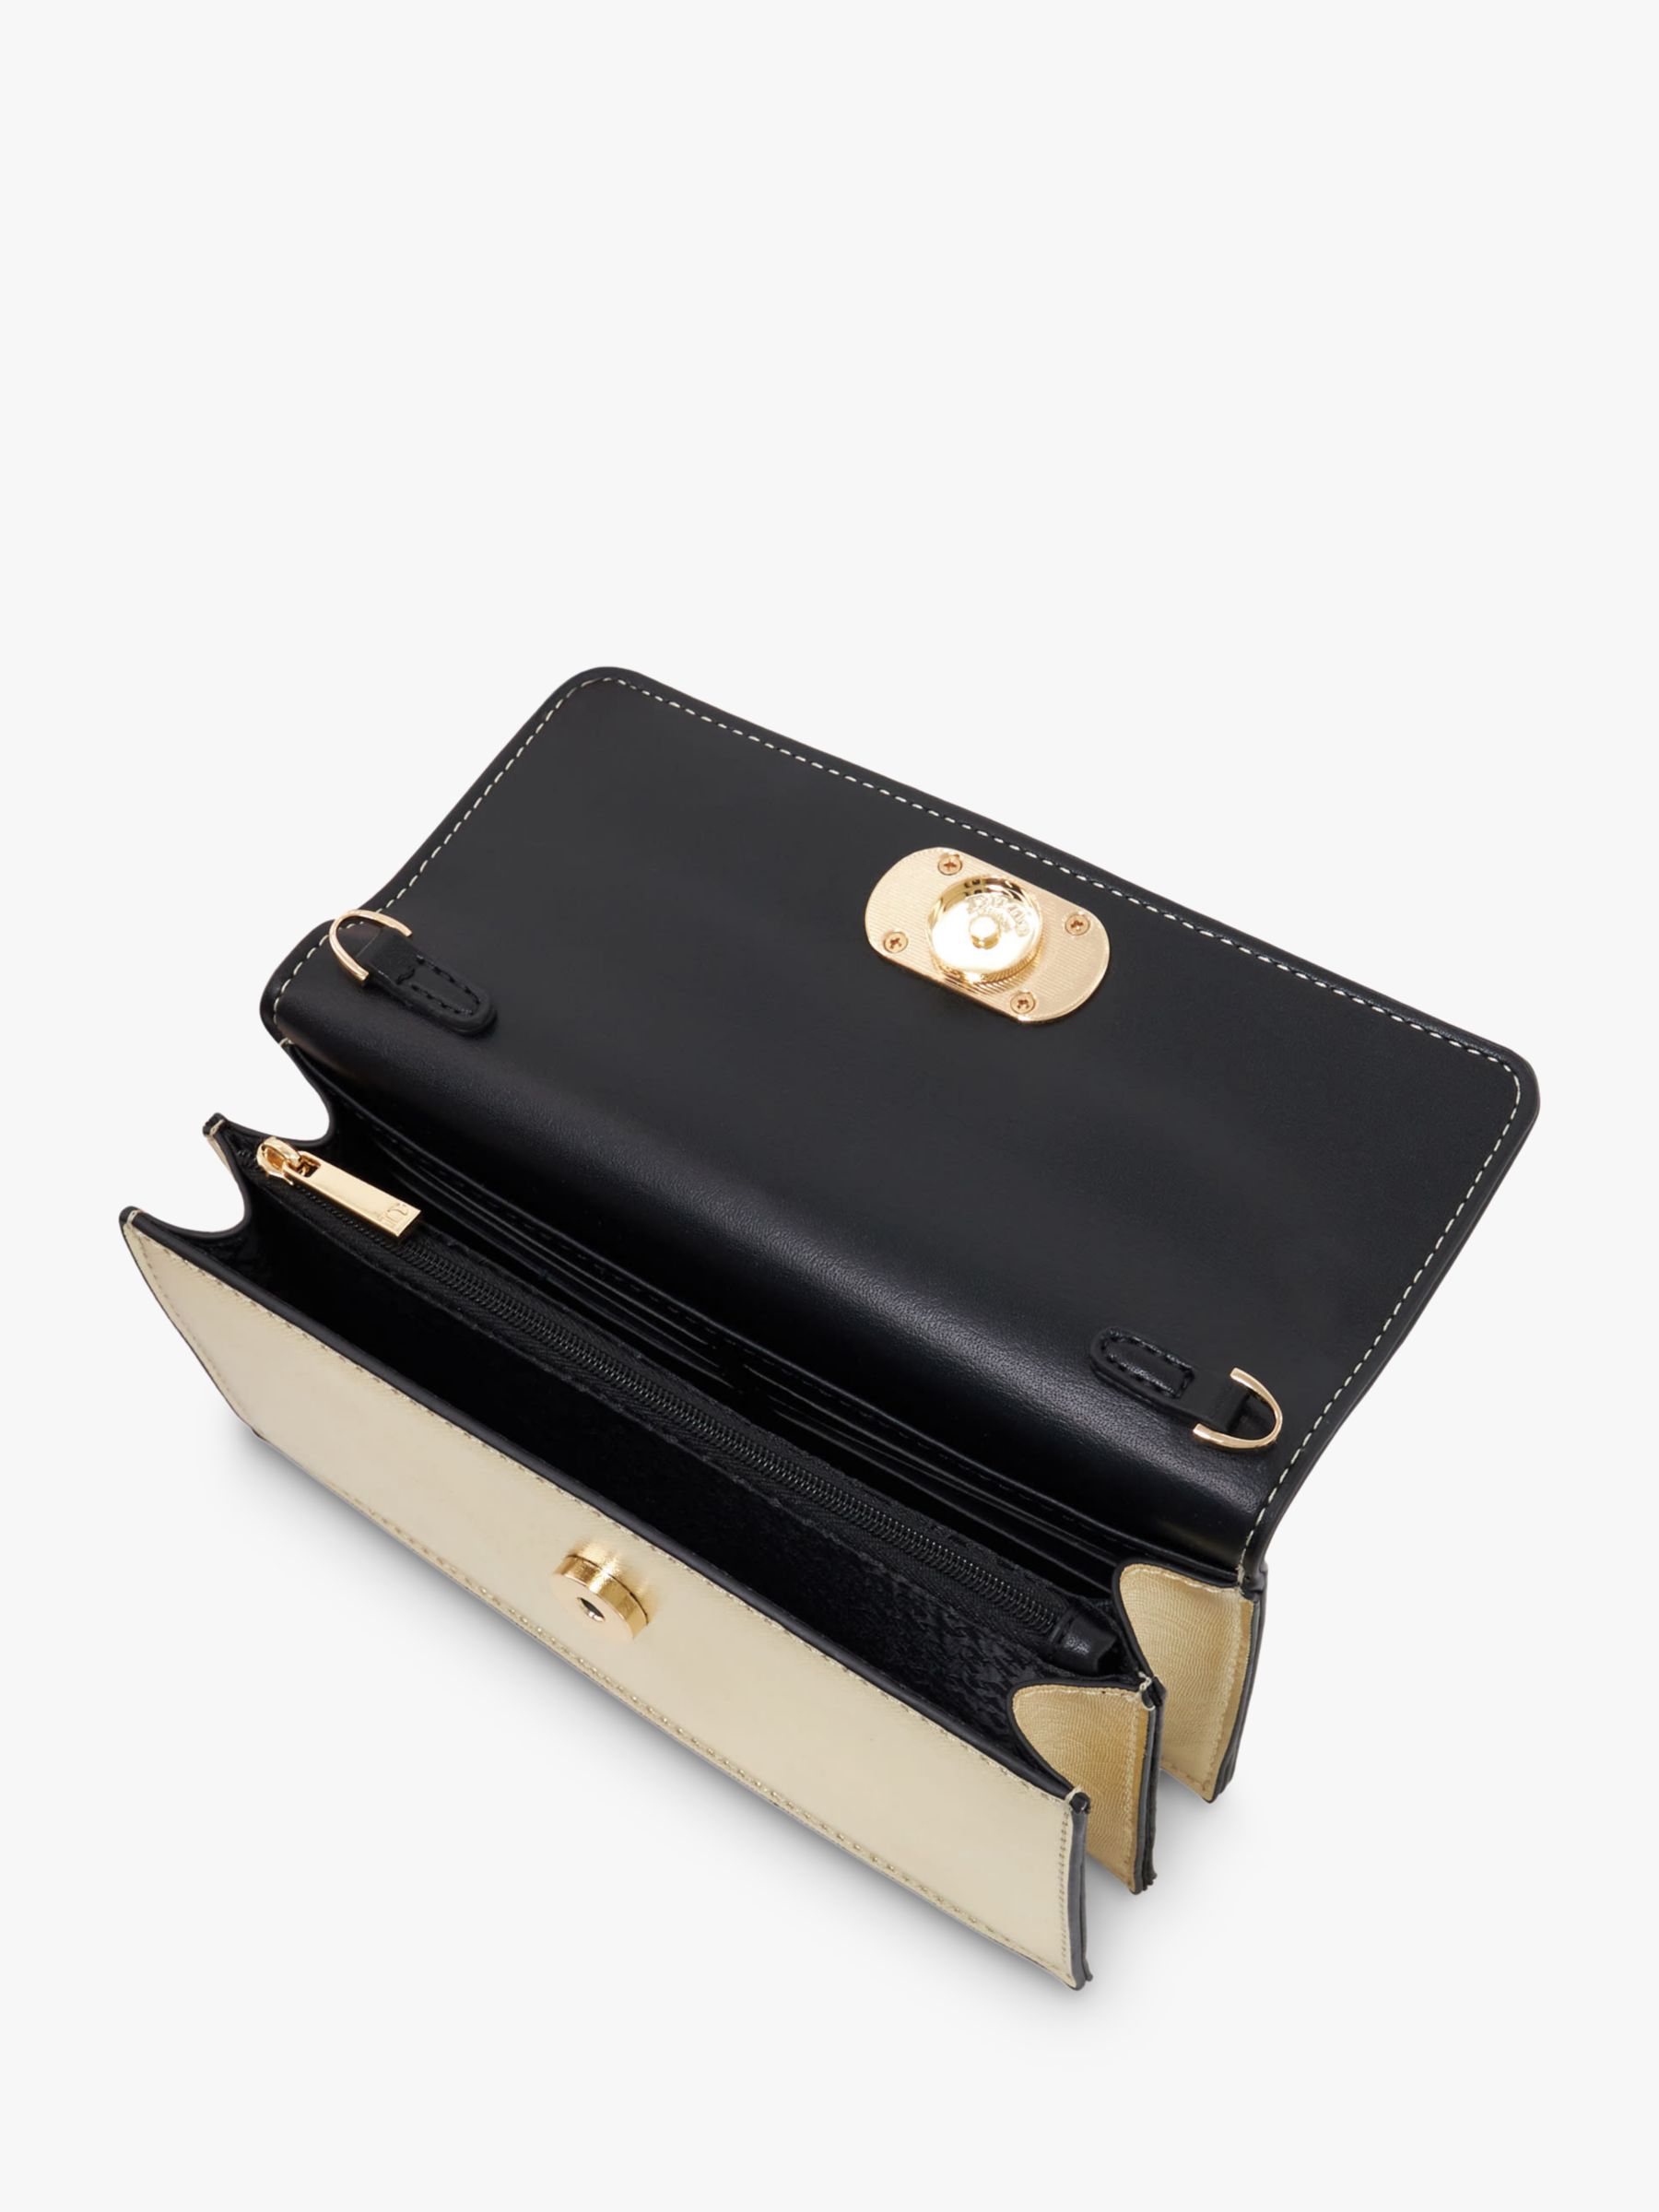 Buy Dune Sapphire Large Flapover Purse, Gold Online at johnlewis.com